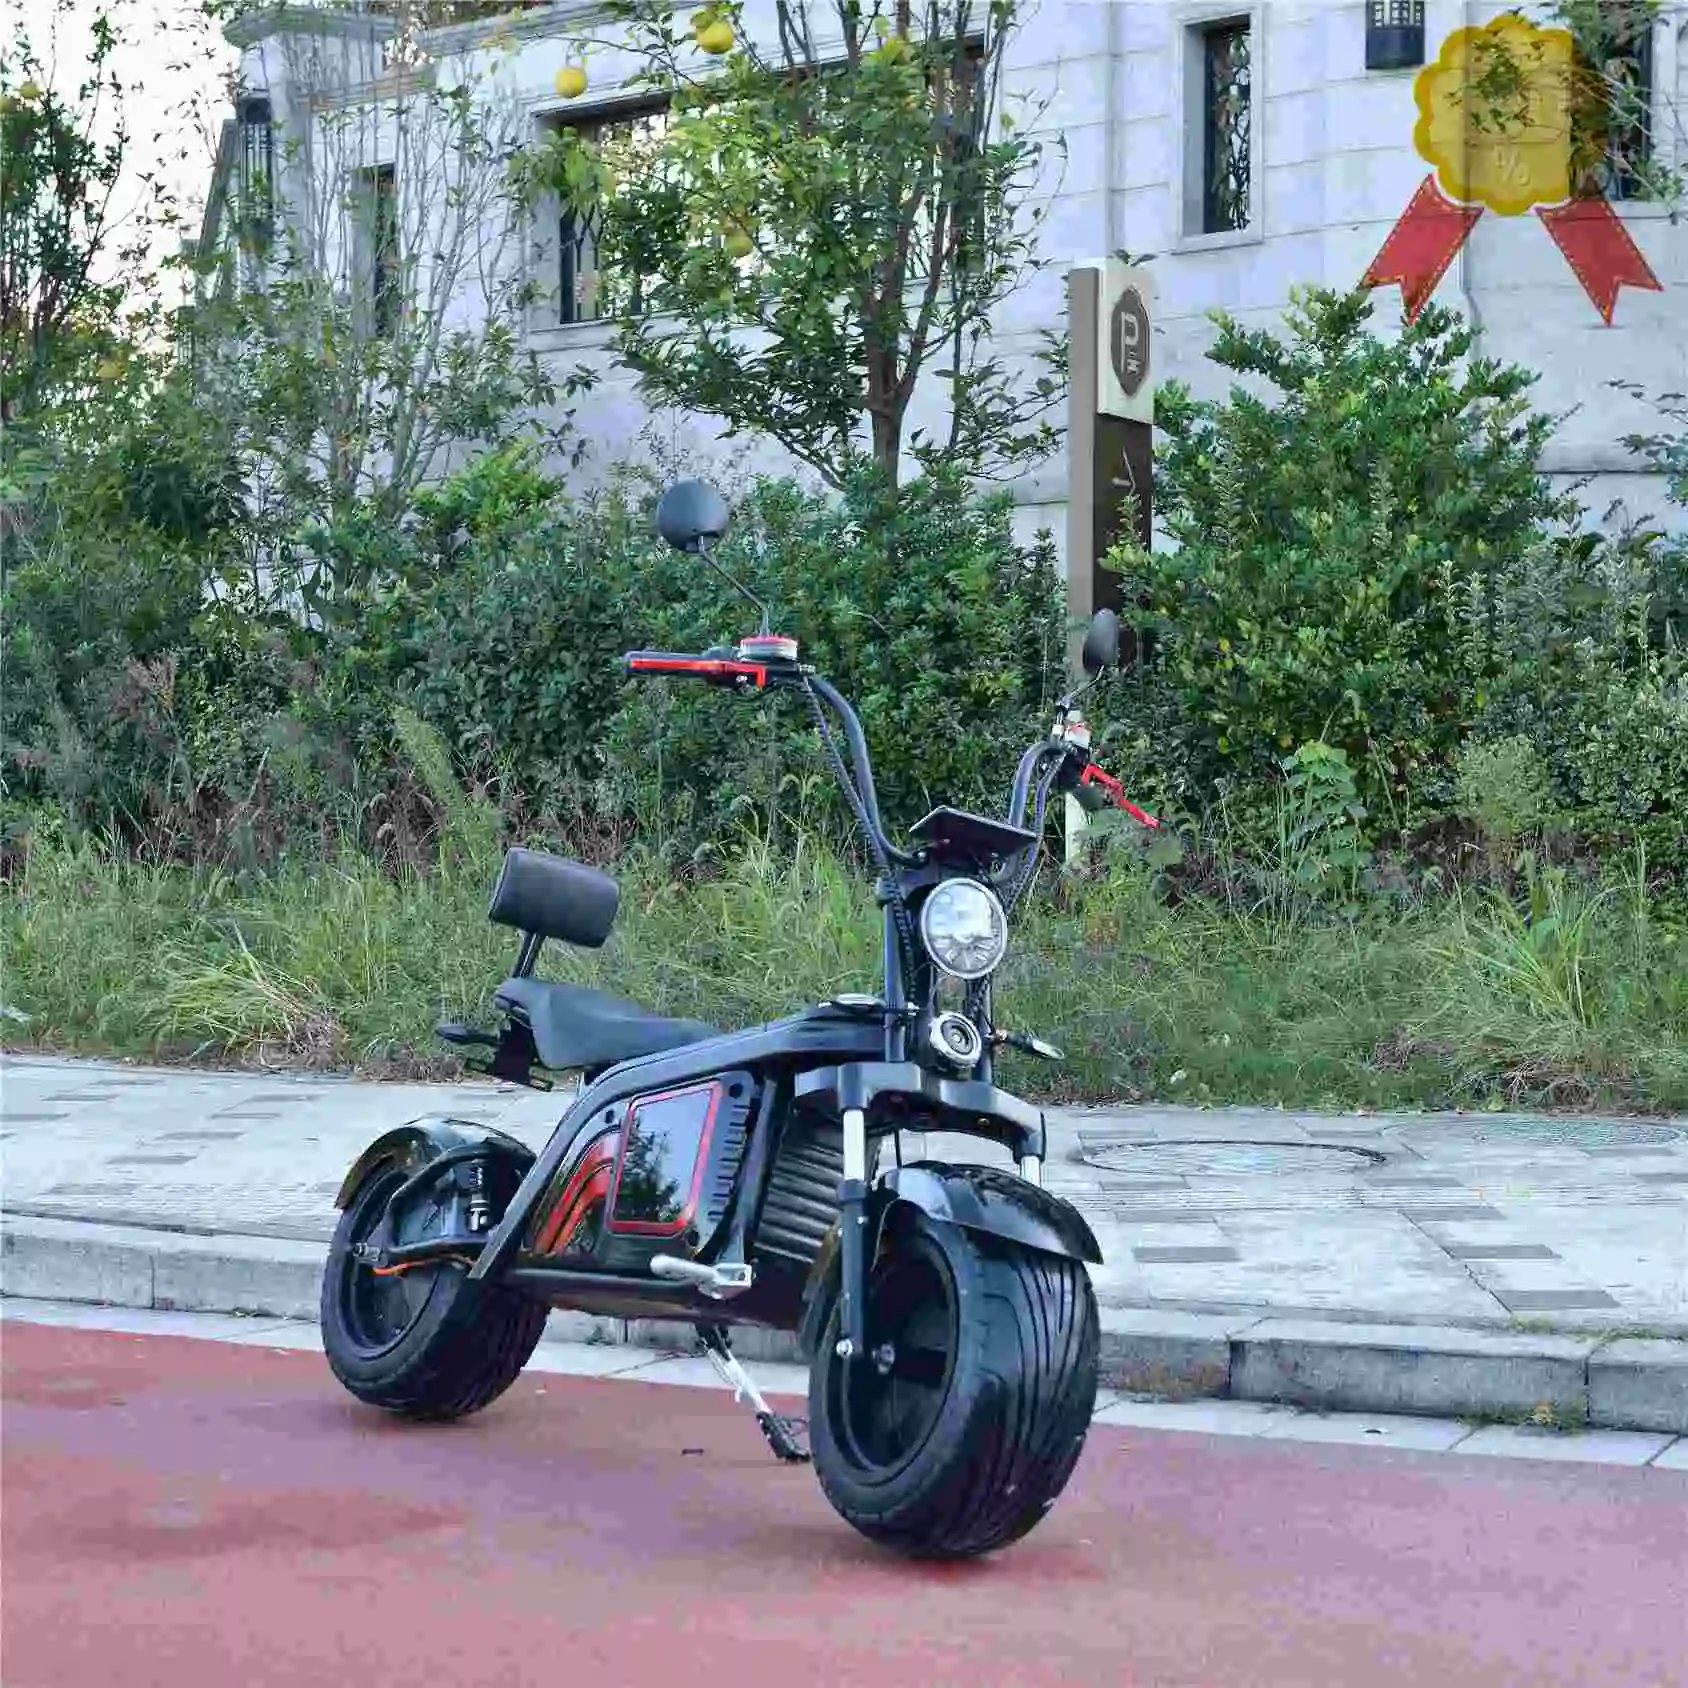 

EEC New Fashion Product Citicoco Bike ,Electric Scooter With Big Wheels